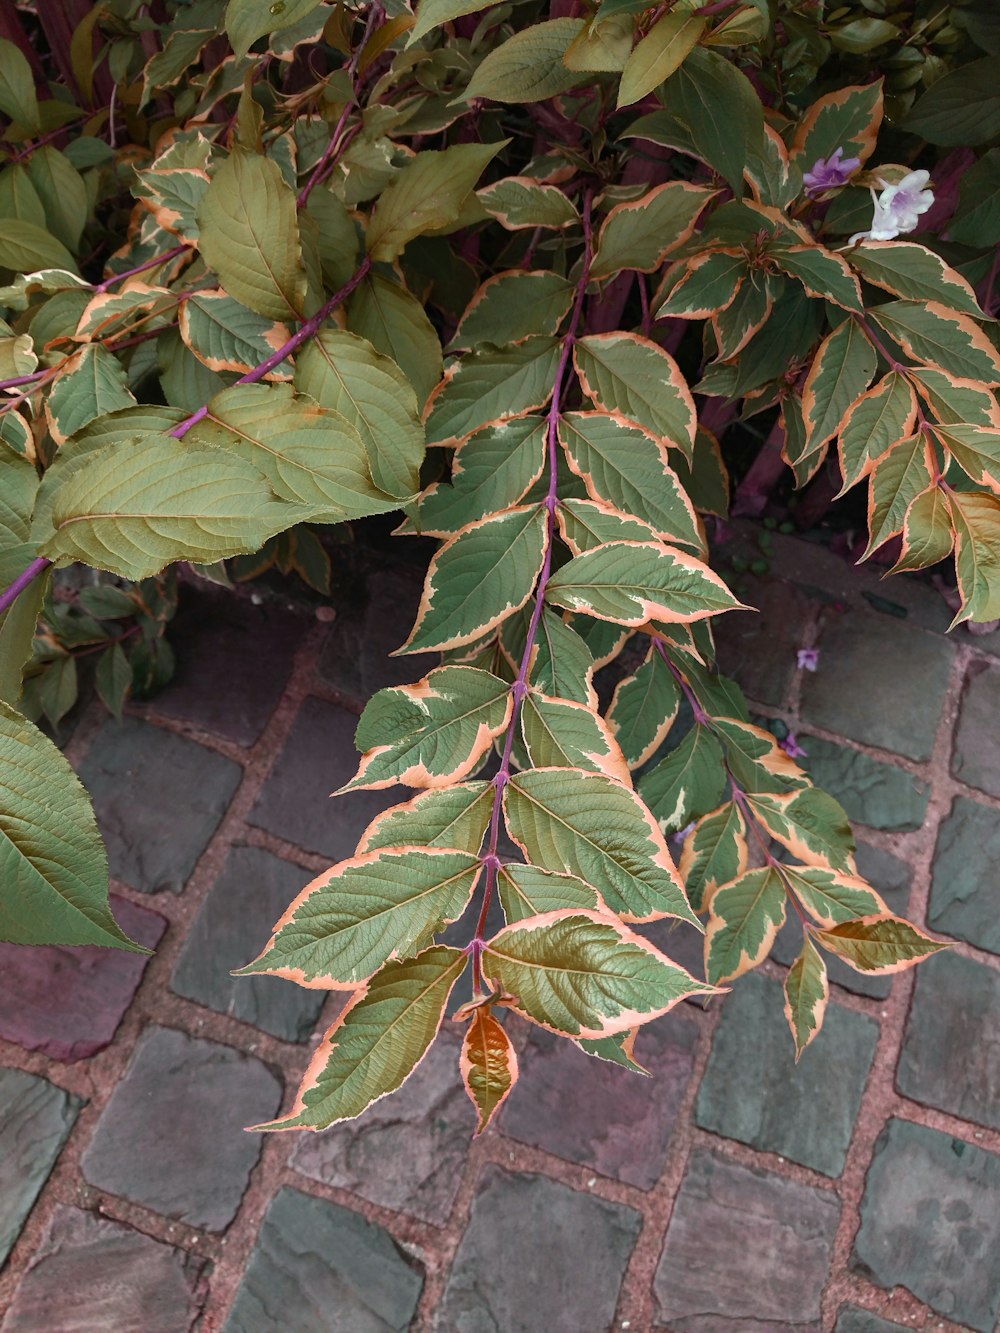 a close up of a leafy plant on a brick walkway